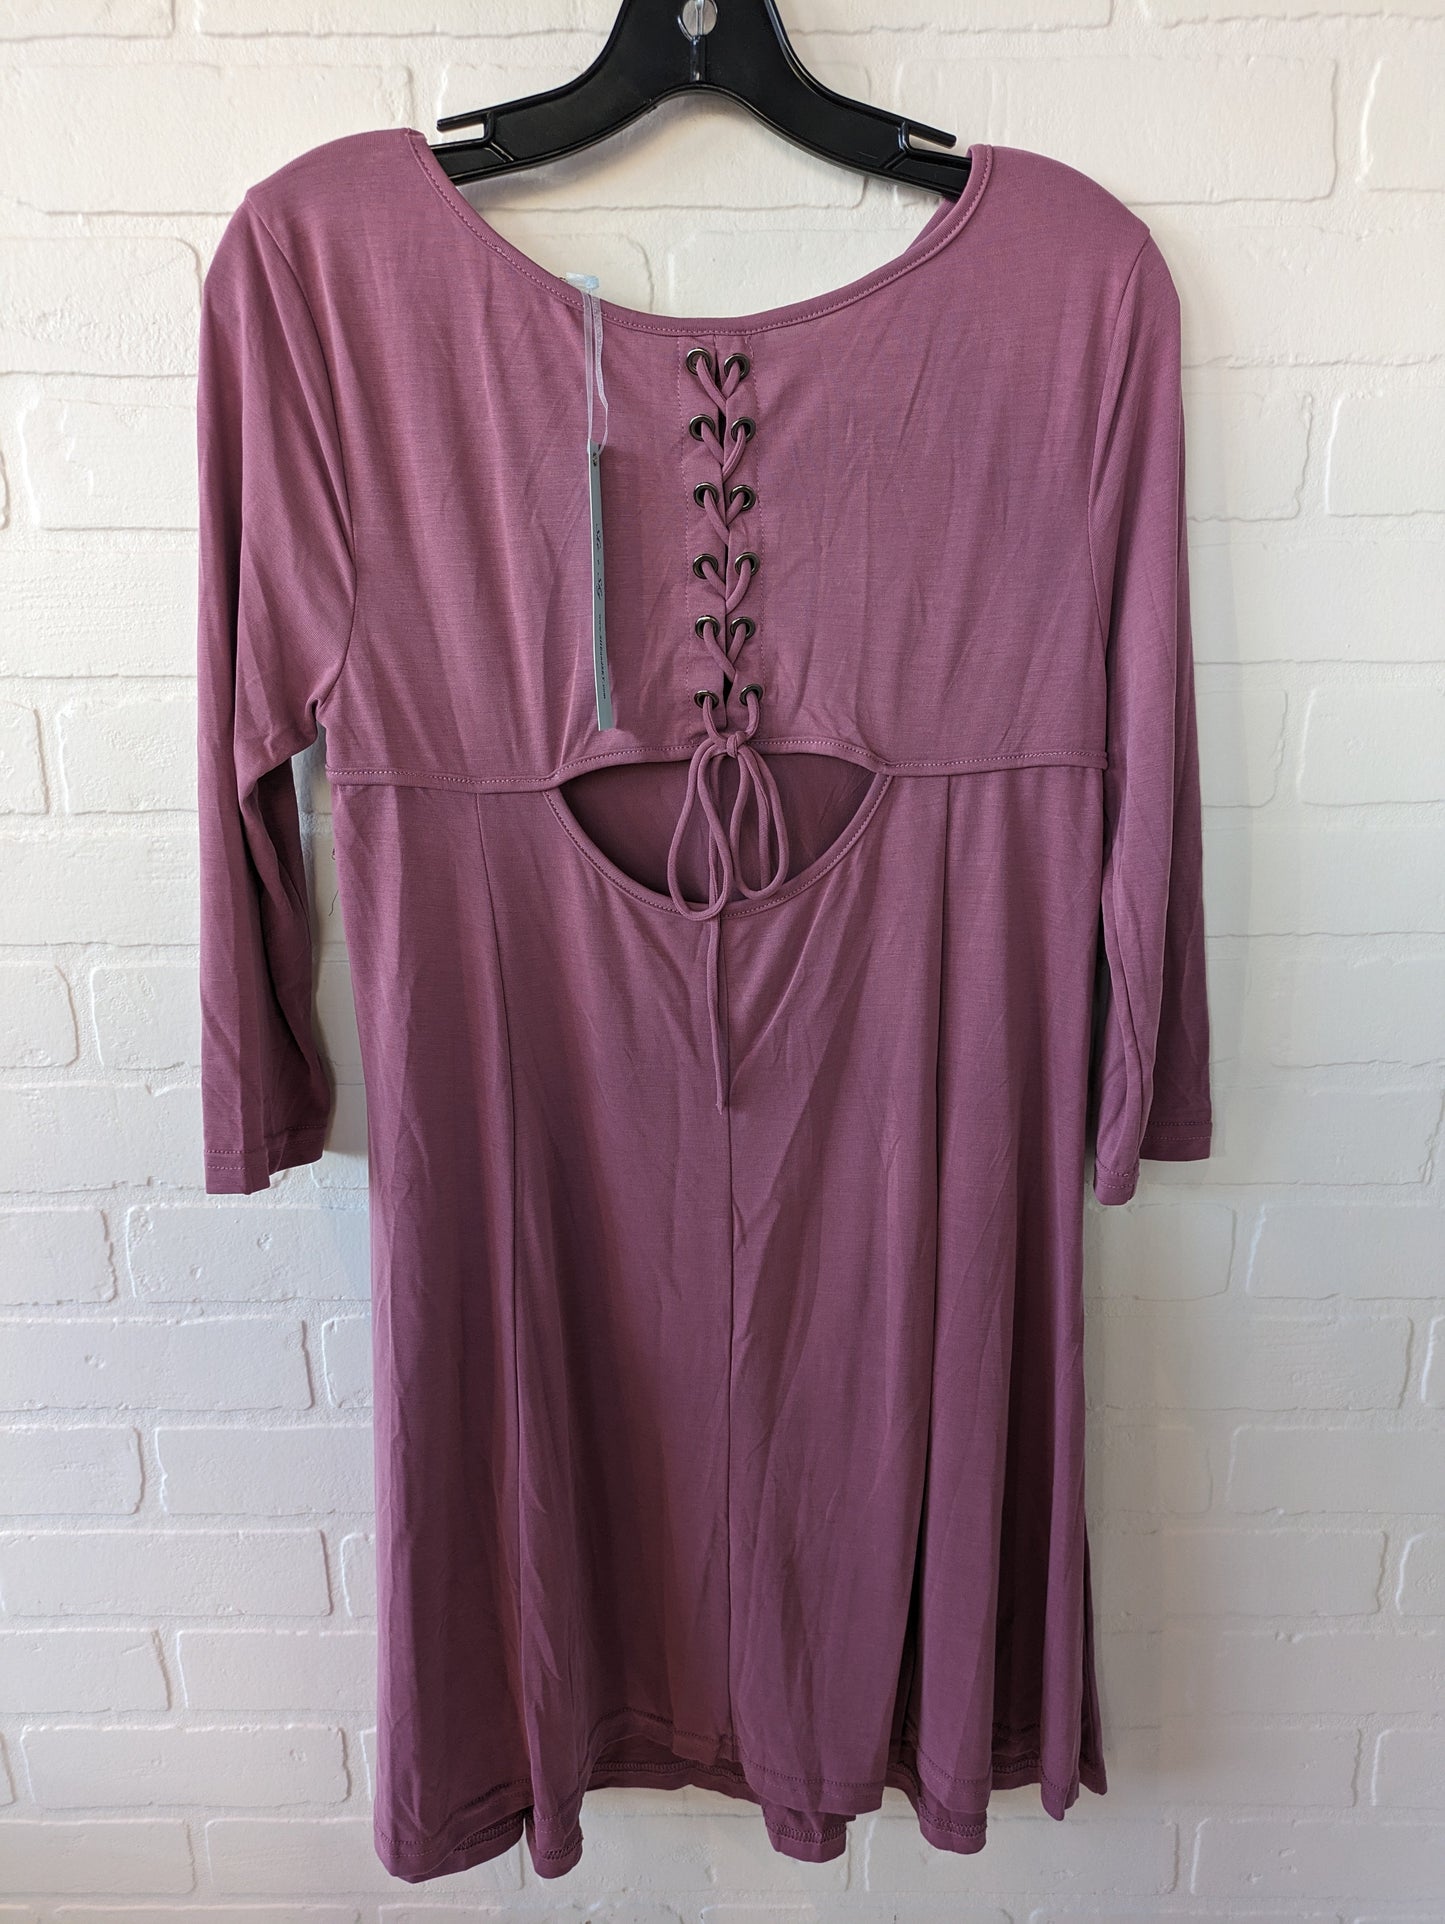 Tunic 3/4 Sleeve By She + Sky  Size: M